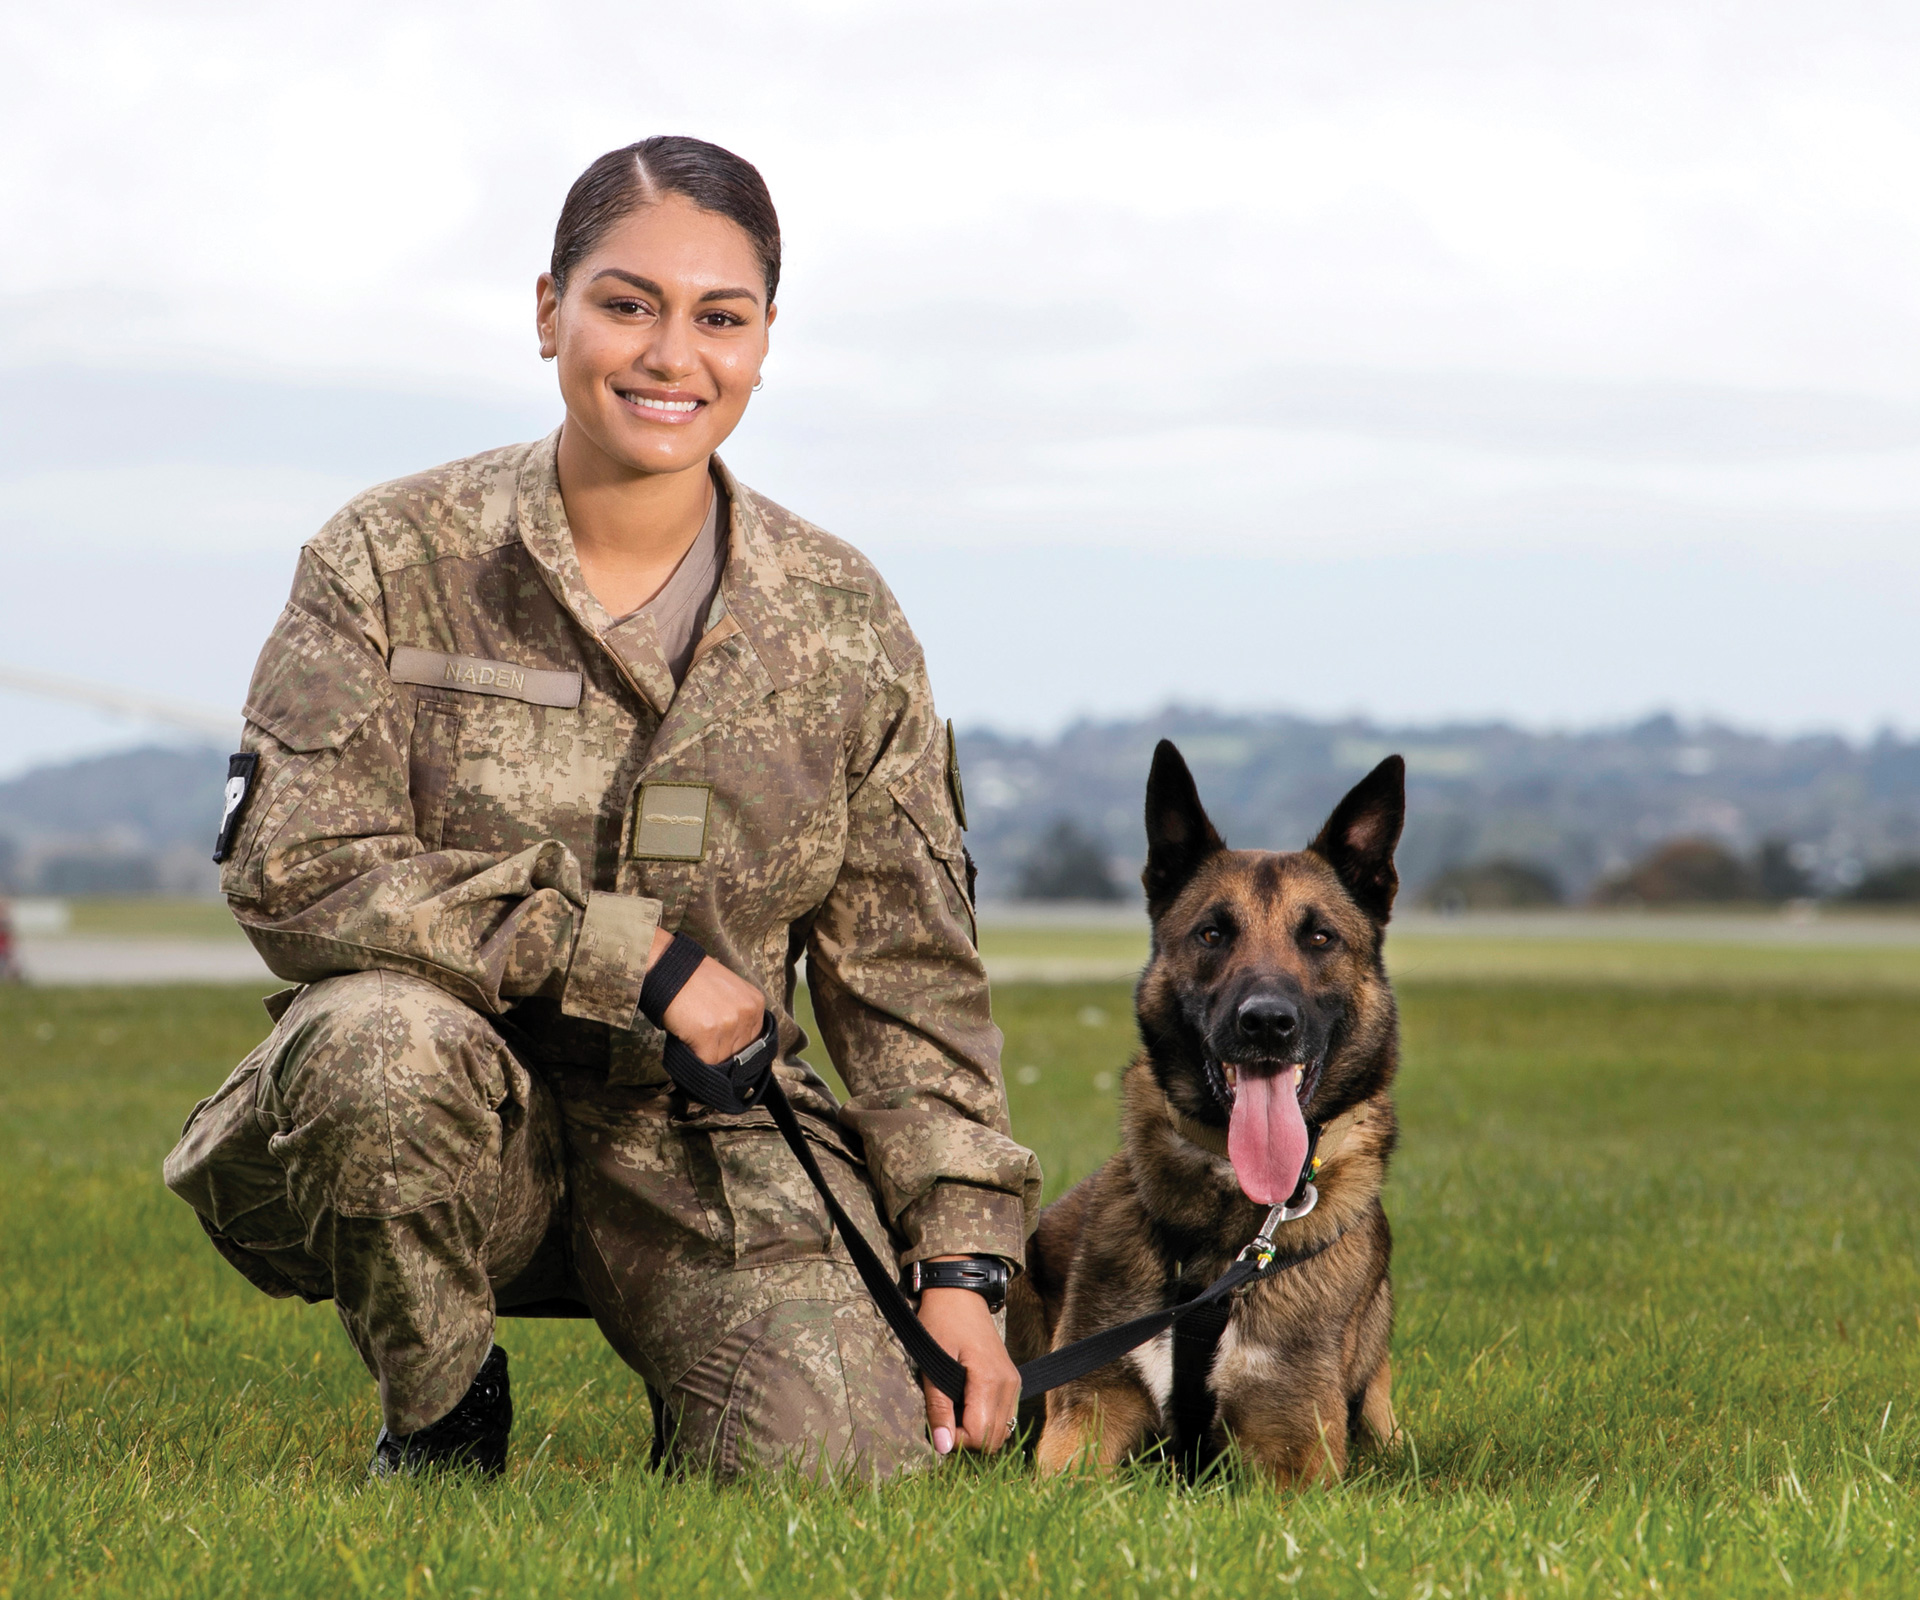 Meet the only female dog handler in the New Zealand Defence Force